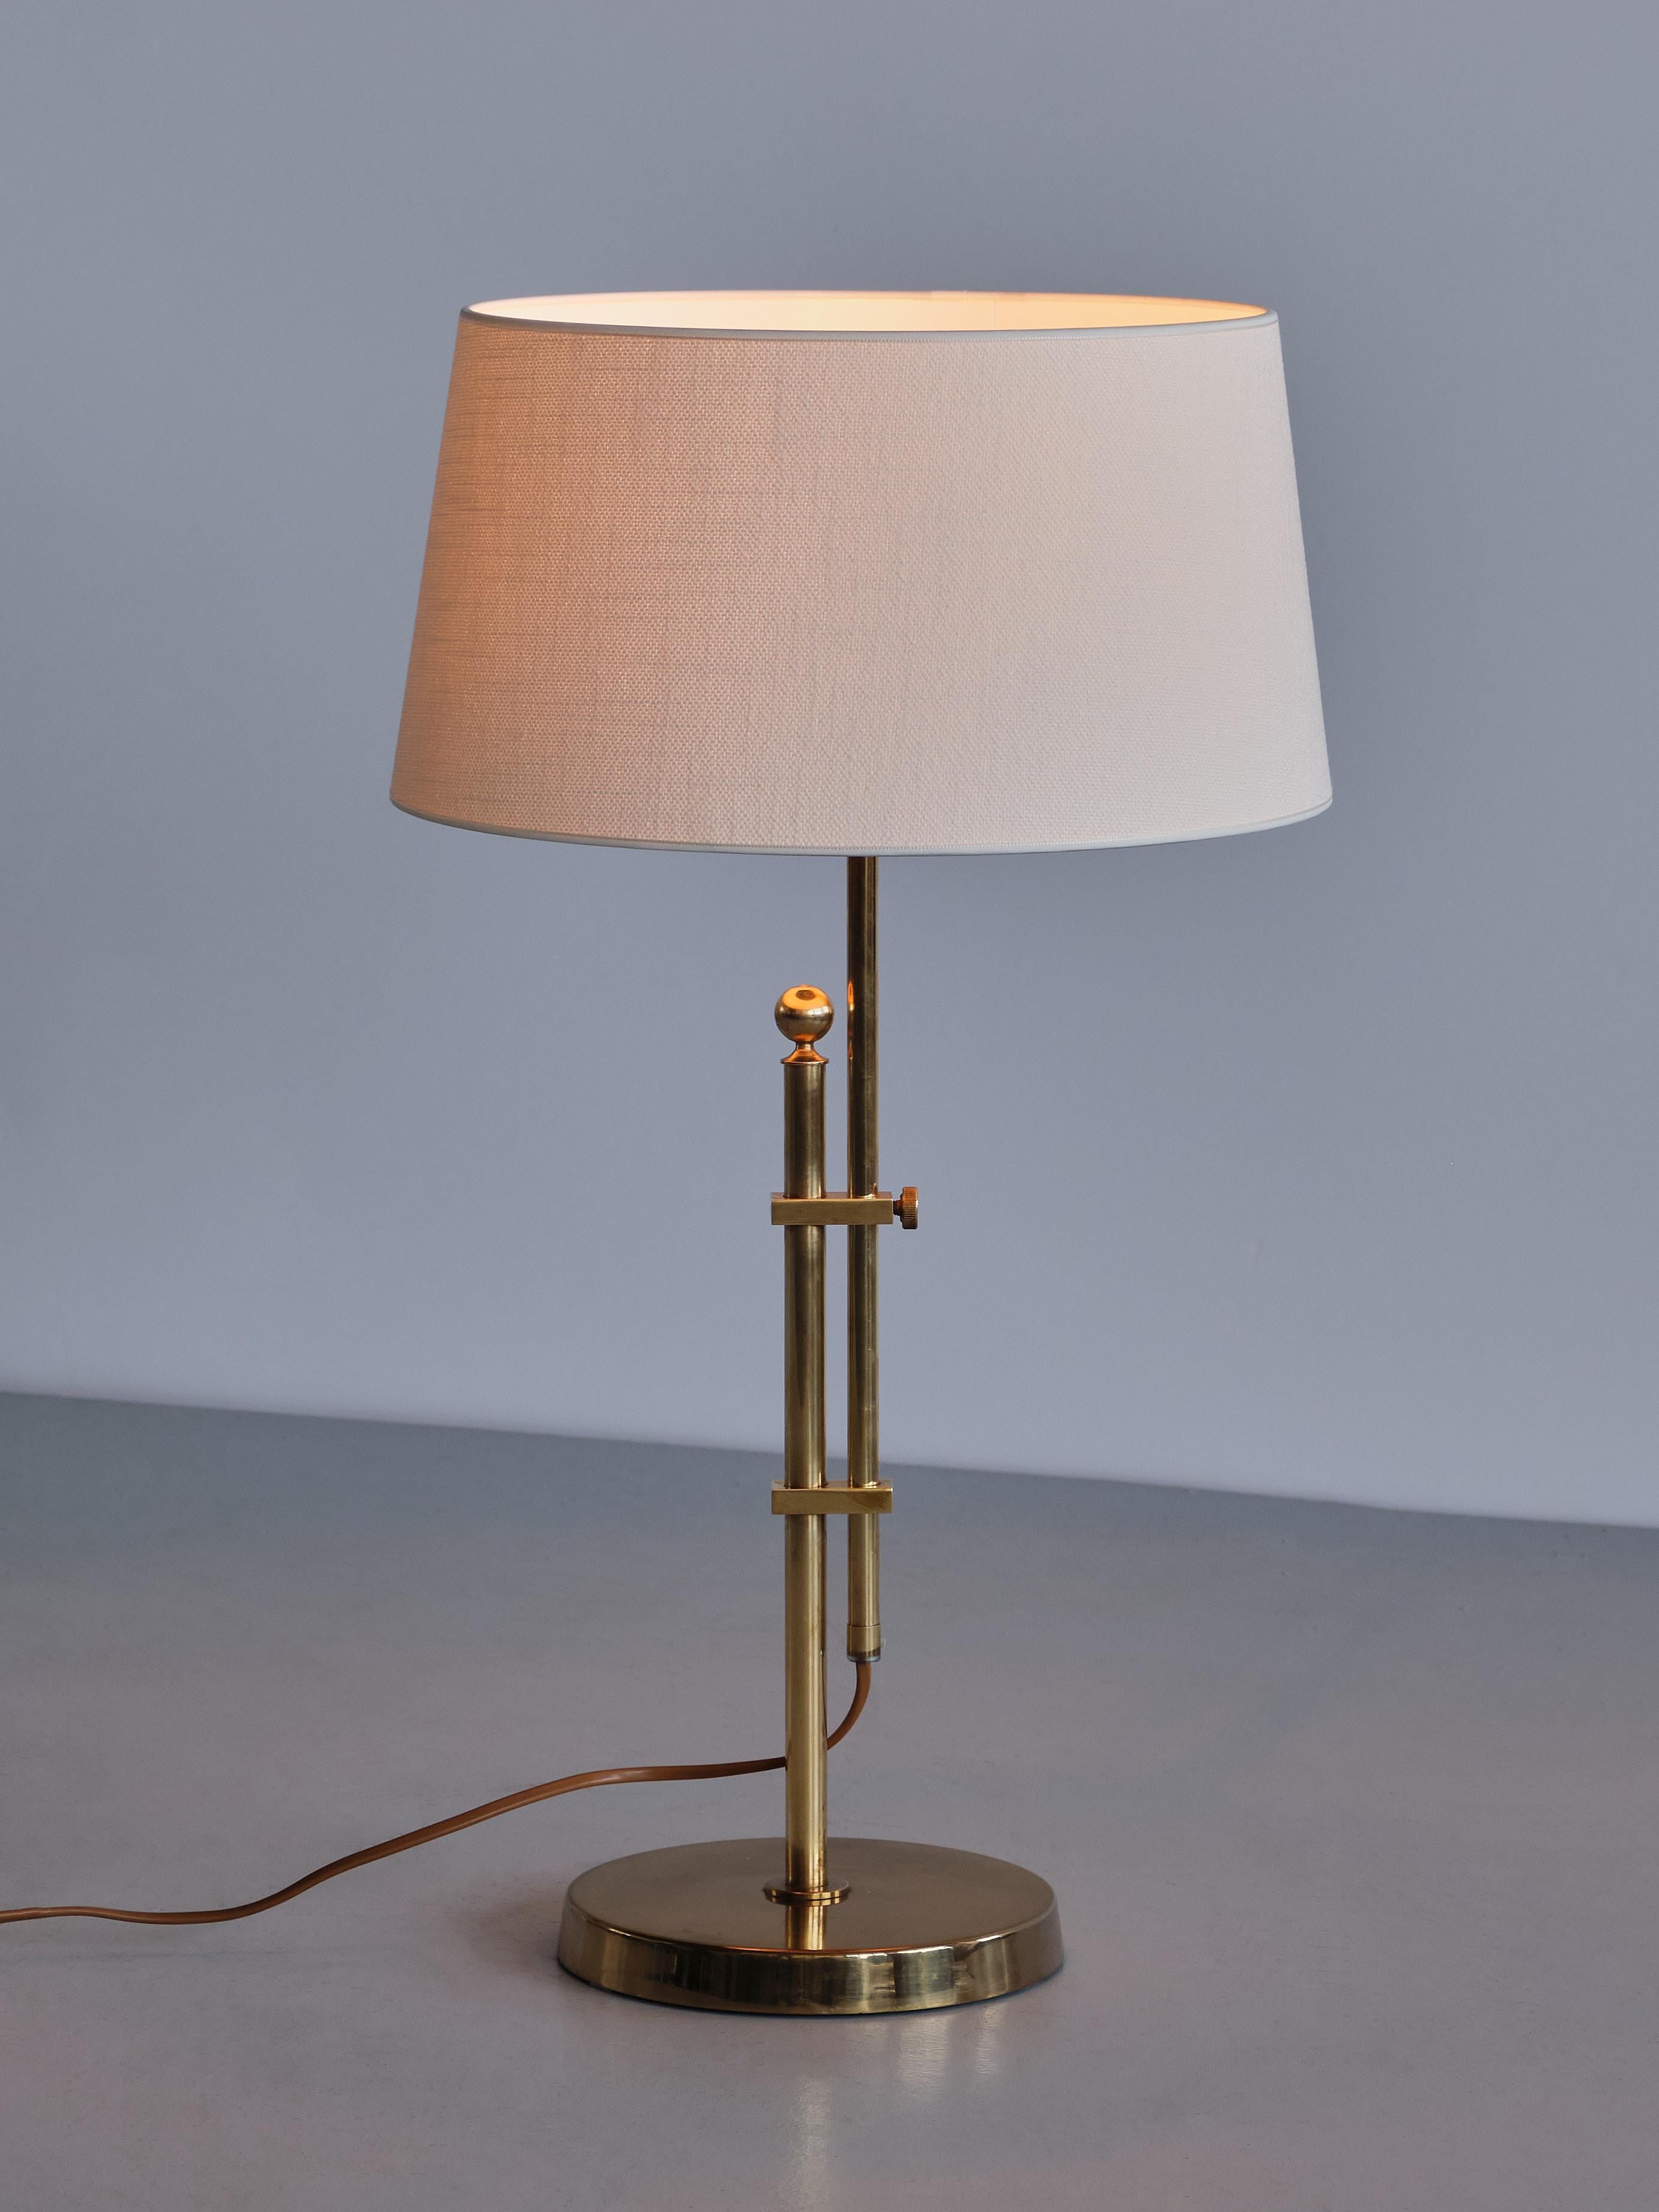 Bergboms B-131 Height Adjustable Table Lamp in Brass, Sweden, 1950s For Sale 4